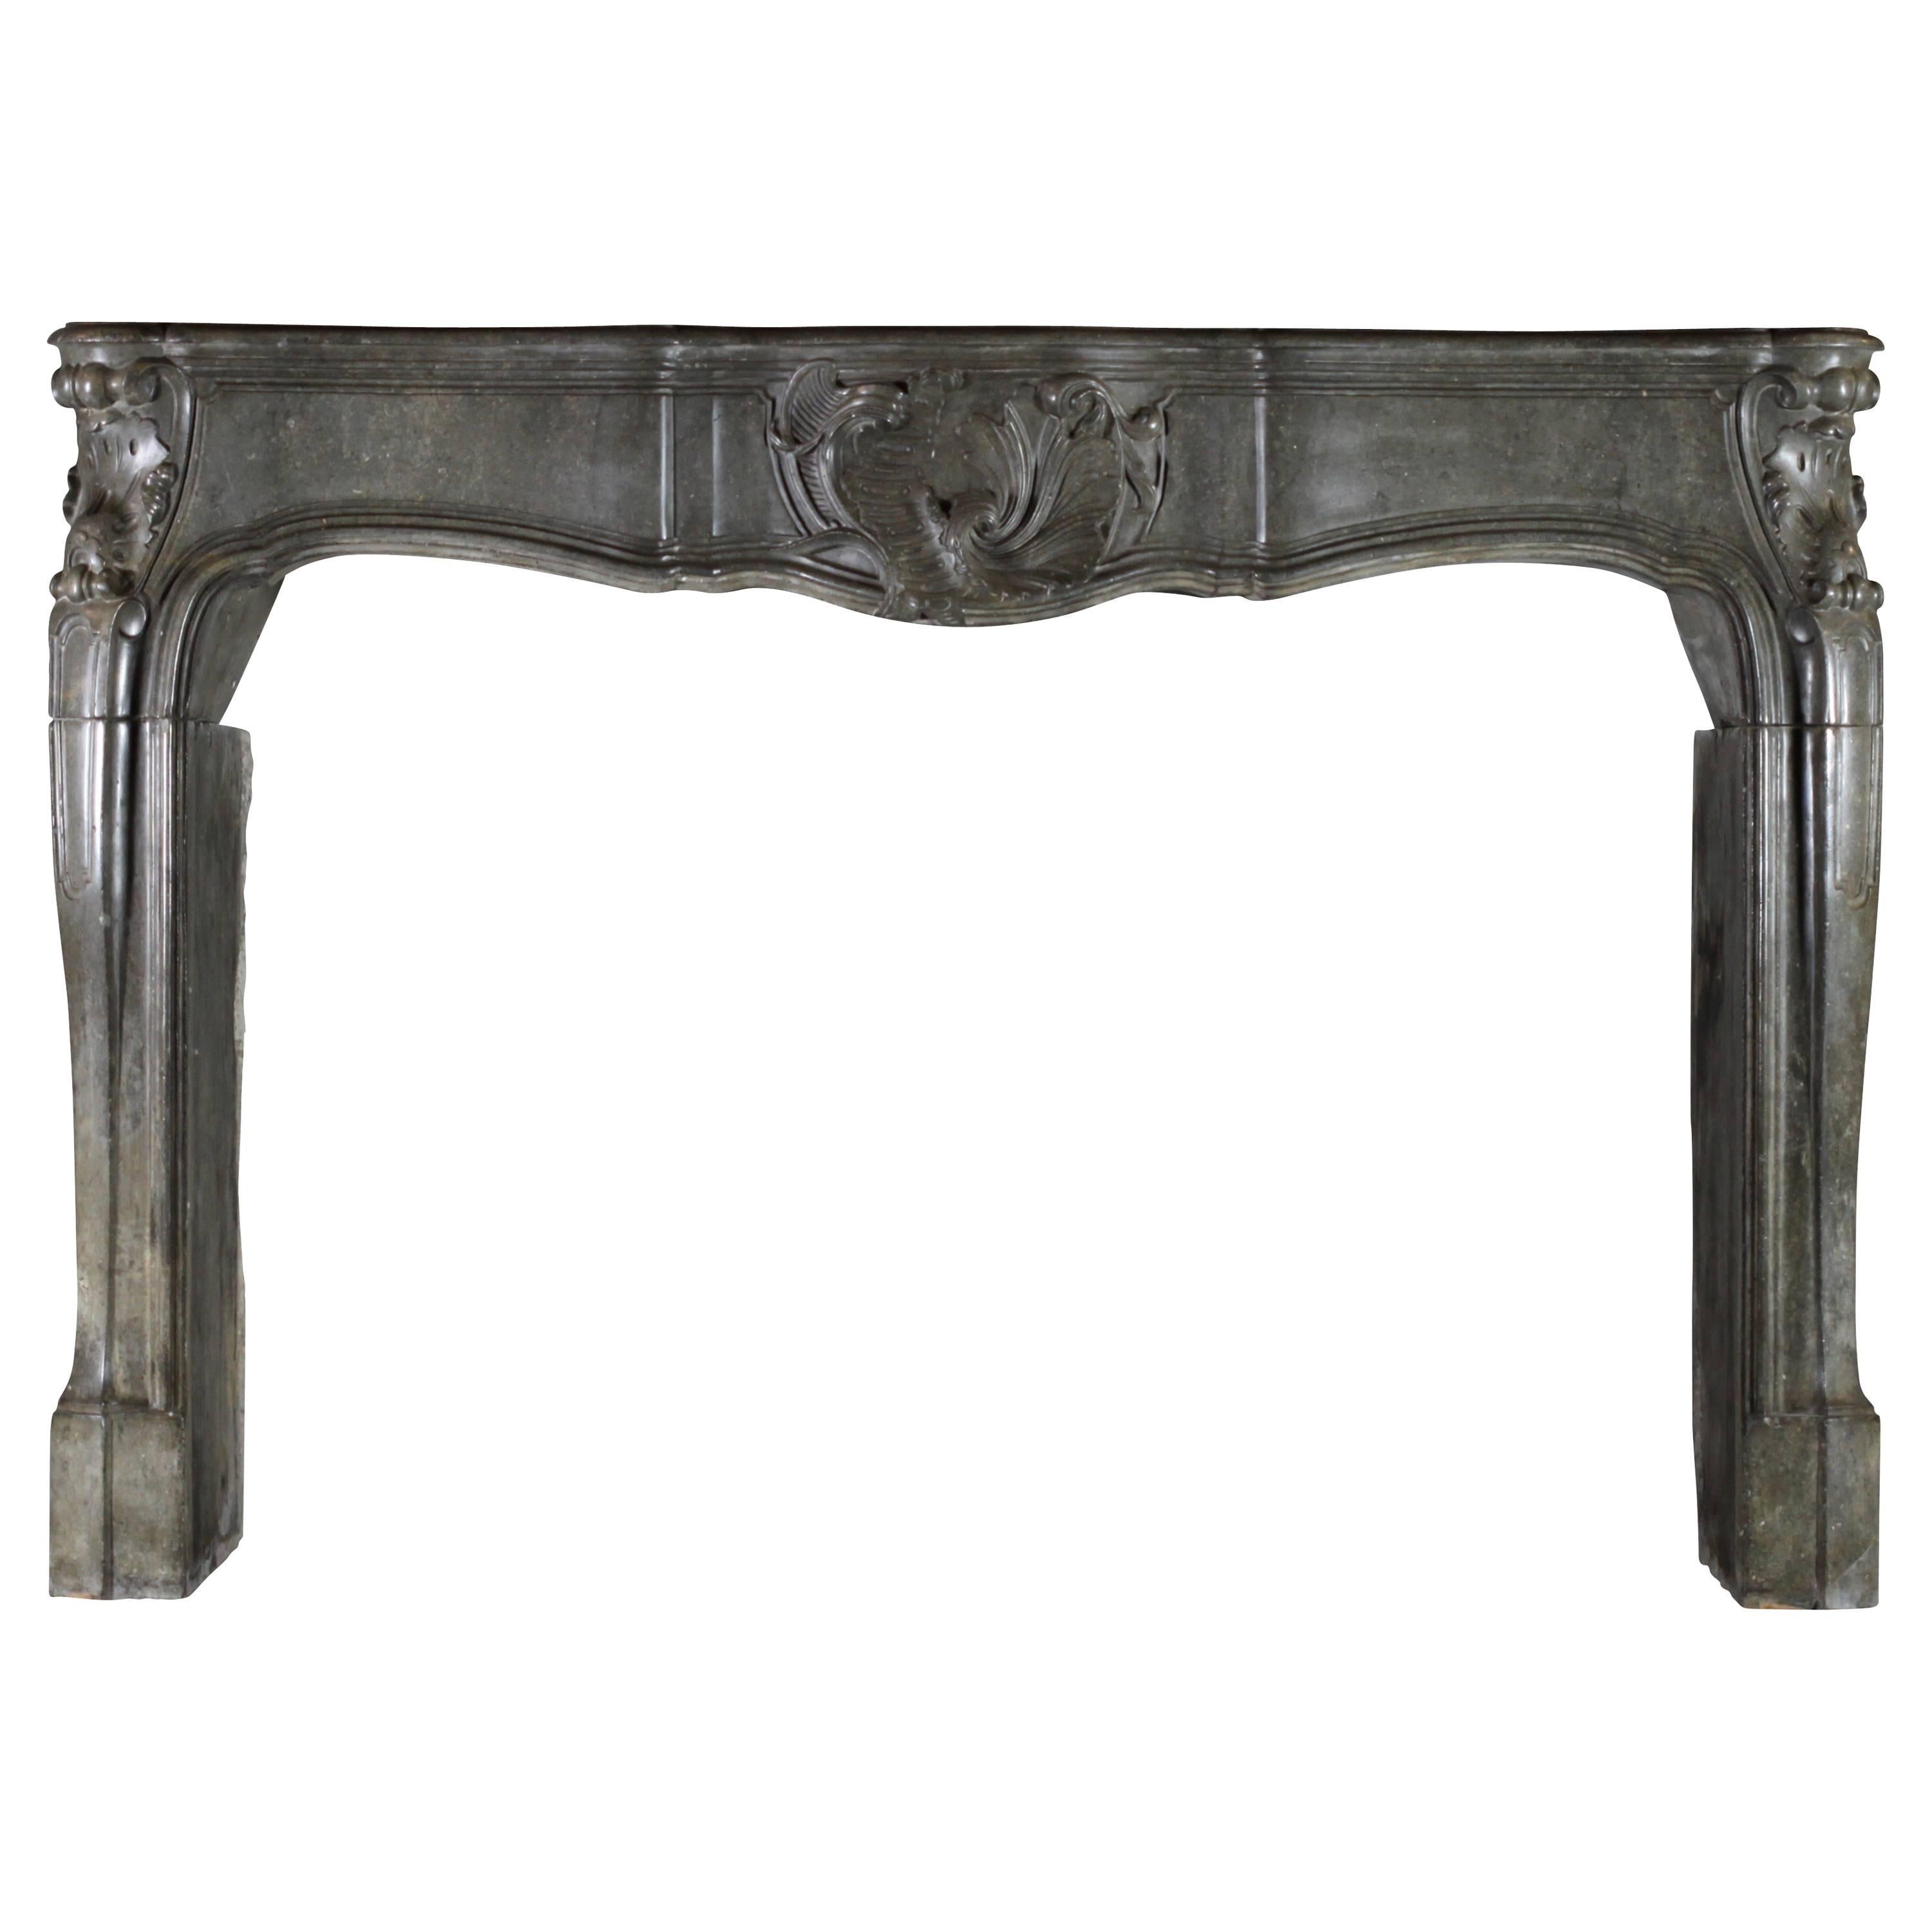 18th Century Classic Antique Fireplace Mantel in Grey Hard Stone